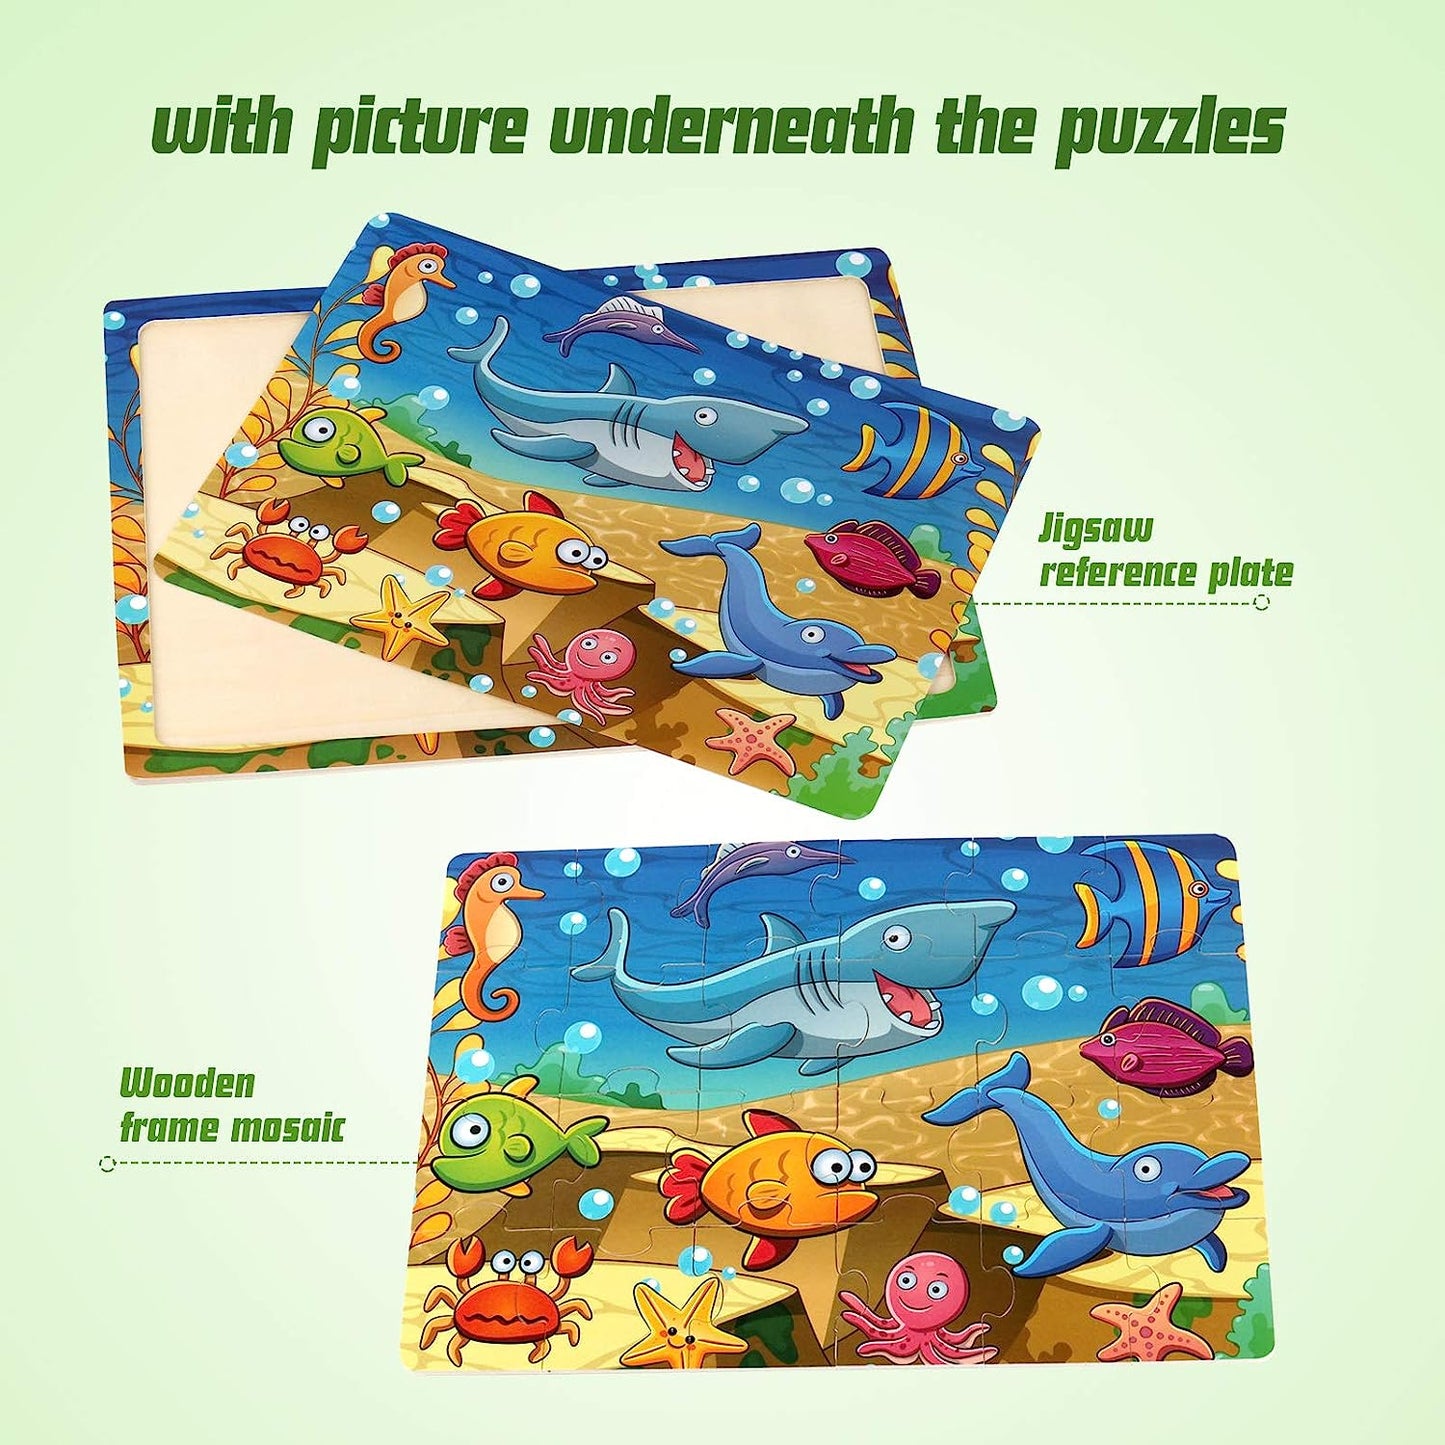 Wooden Jigsaw Puzzles for Kids Age 3-5 Year Old, 4 Pack 24-40 Pieces Preschool Educational Learning Toys Gift Set for Children Boys and Girls, Sea Life, Insects, Animals, Dinosaurs Themes